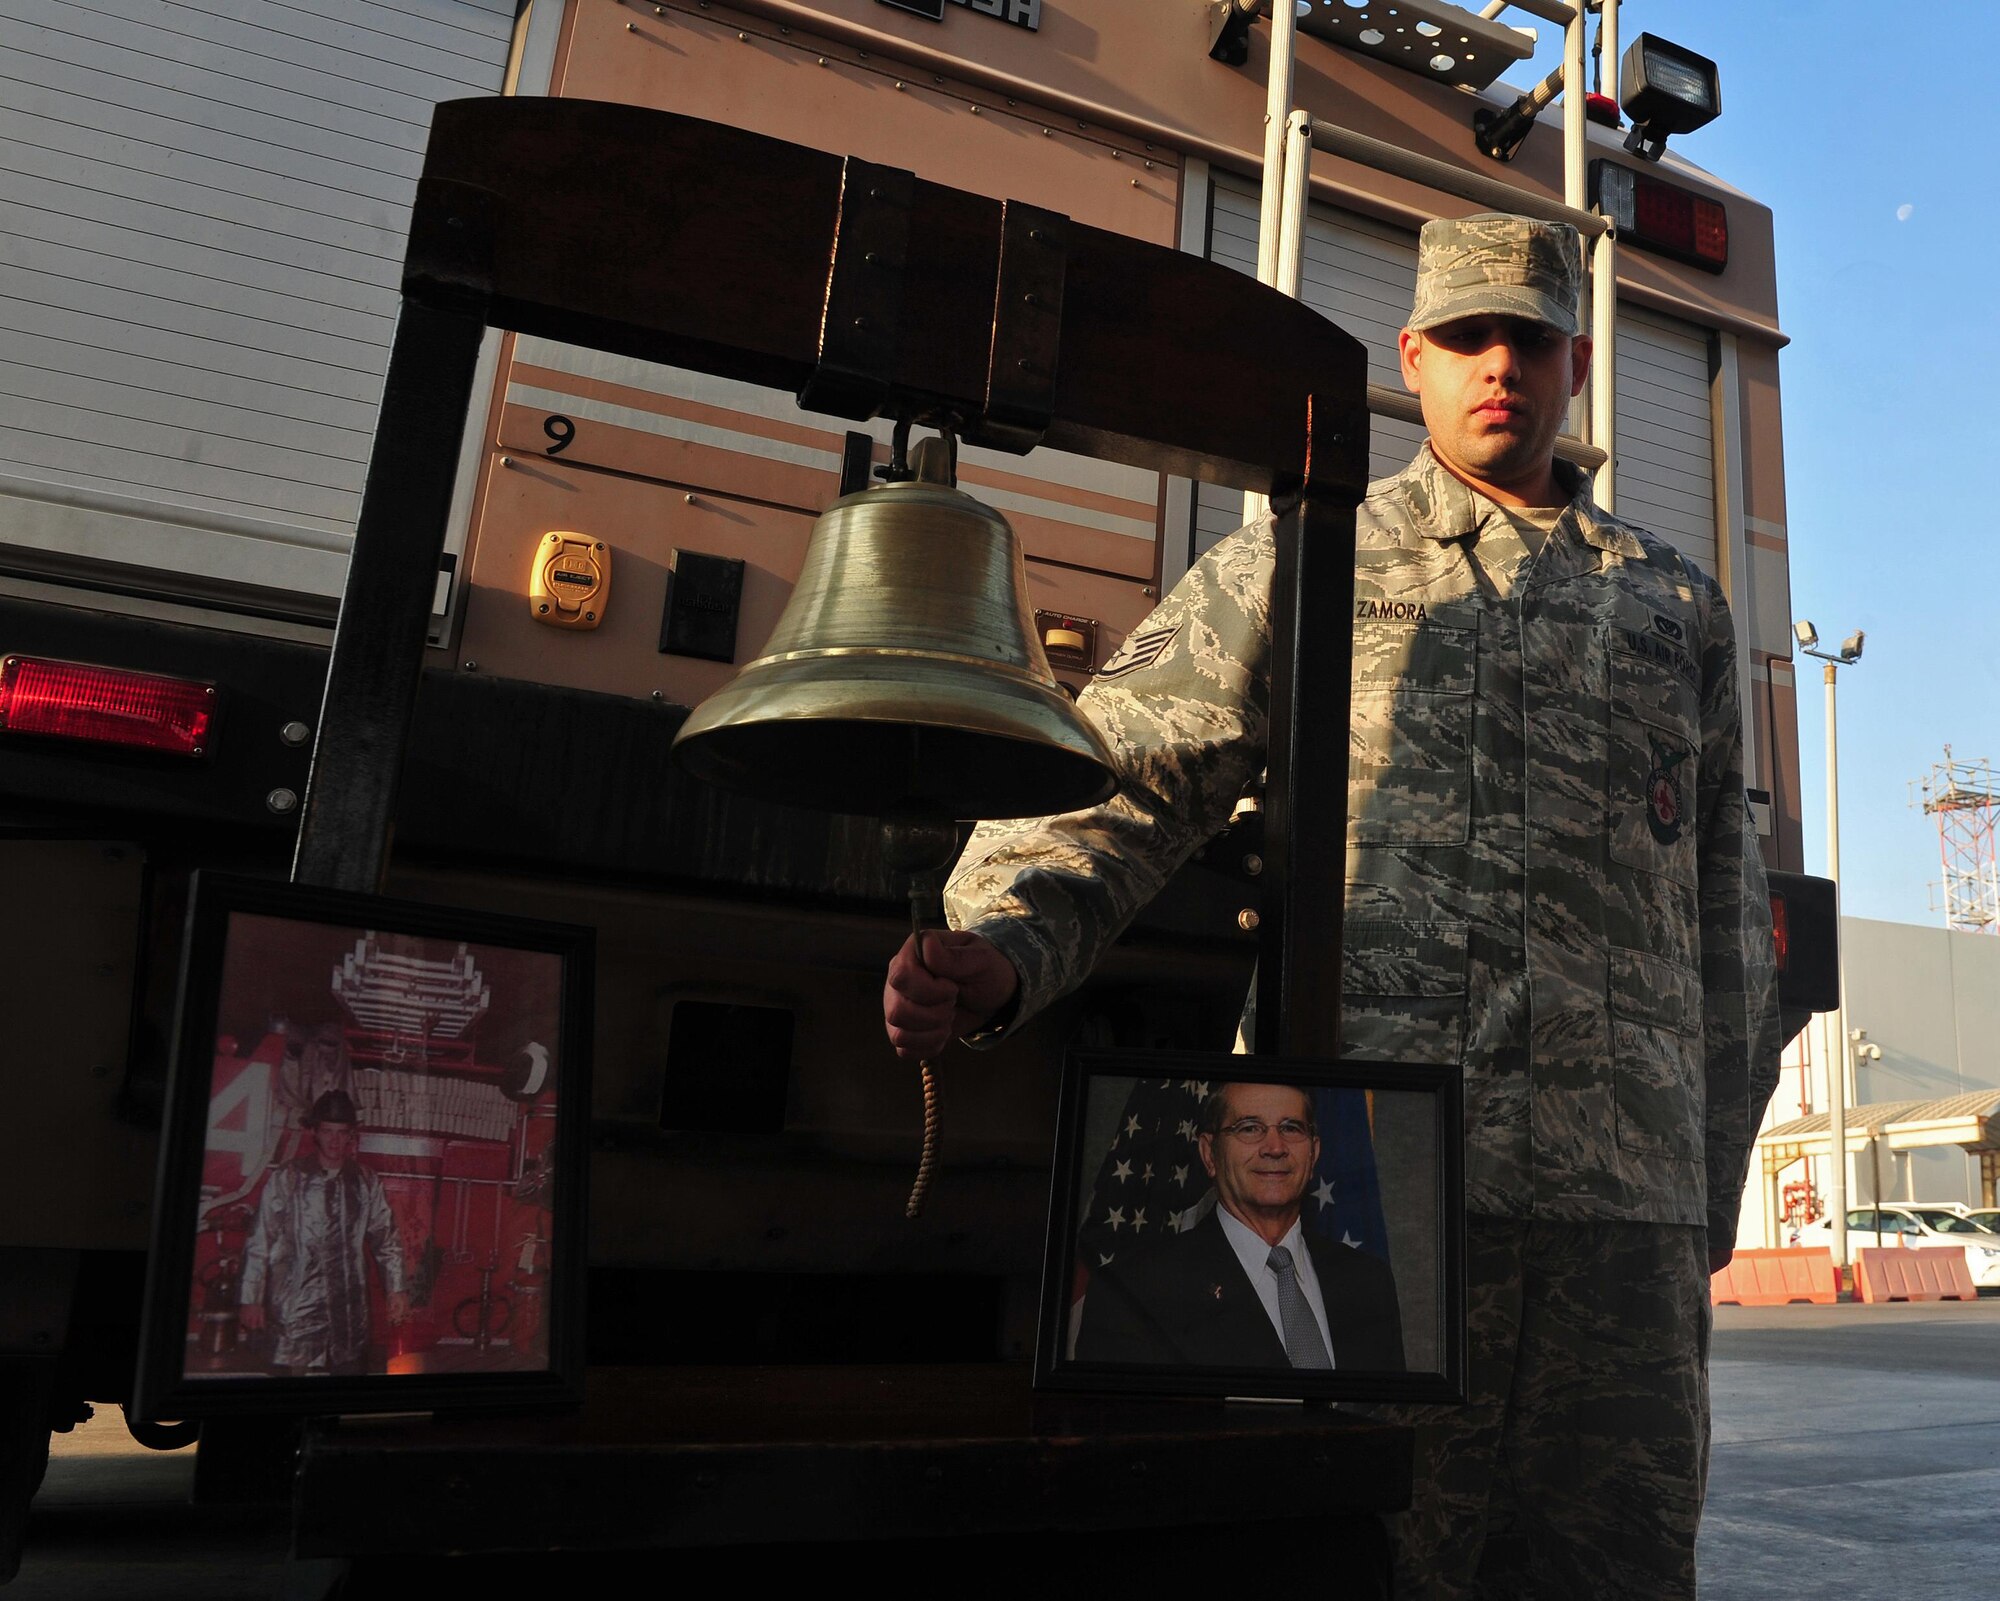 Staff Sgt. Hector, 380th Expeditionary Civil Engineer Squadron firefighter, rings a bell during a Firefighter Last Call Ceremony for departed, former Air Force Fire Chief Donald Warner at an undisclosed location in Southwest Asia, Dec. 30, 2015. The belling ringing, recalls a time in history when its sounding was intertwined with the lives of firefighters, the ringing calling firefighters to an alarm and another signaling the alarm was over. (U.S. Air Force photo by Staff Sgt. Kentavist P. Brackin/released)